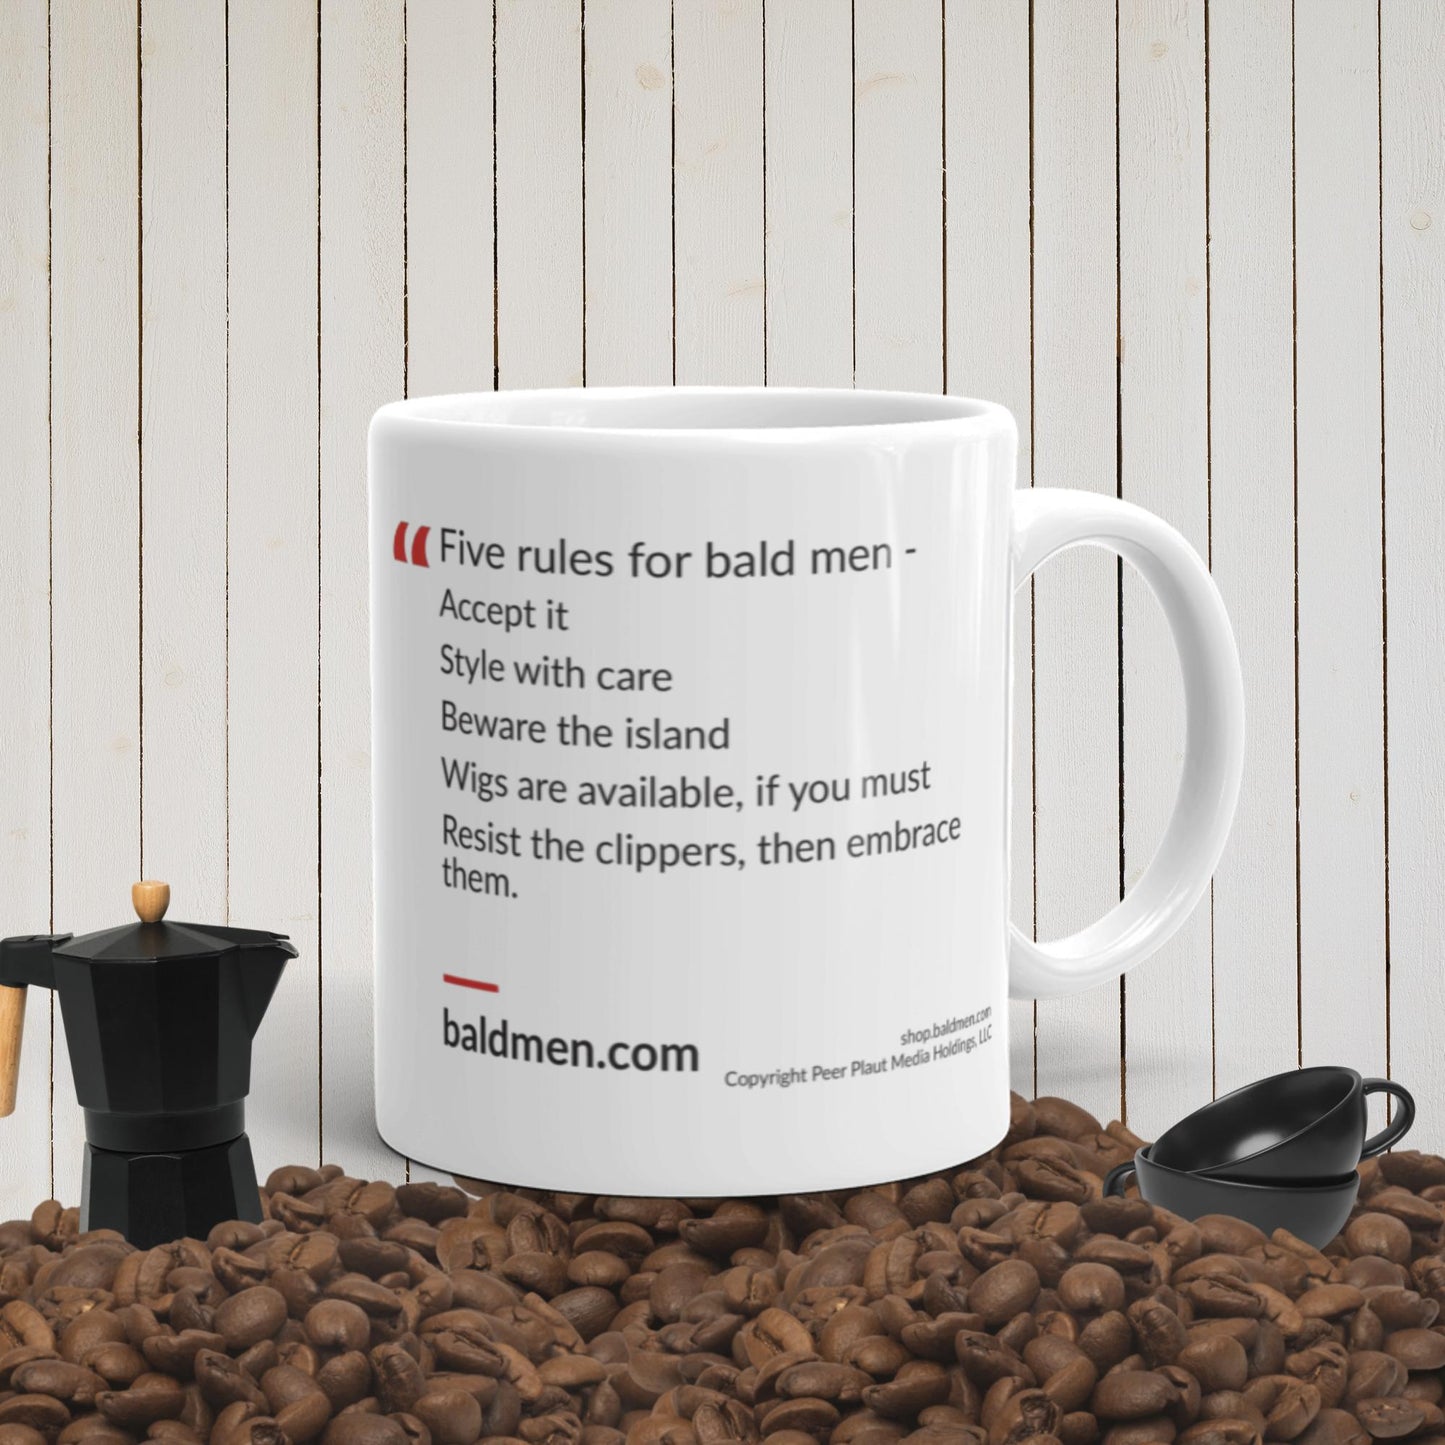 Sip your favorite hot beverage in style with the Five Rules for Bald Men Ceramic Mug